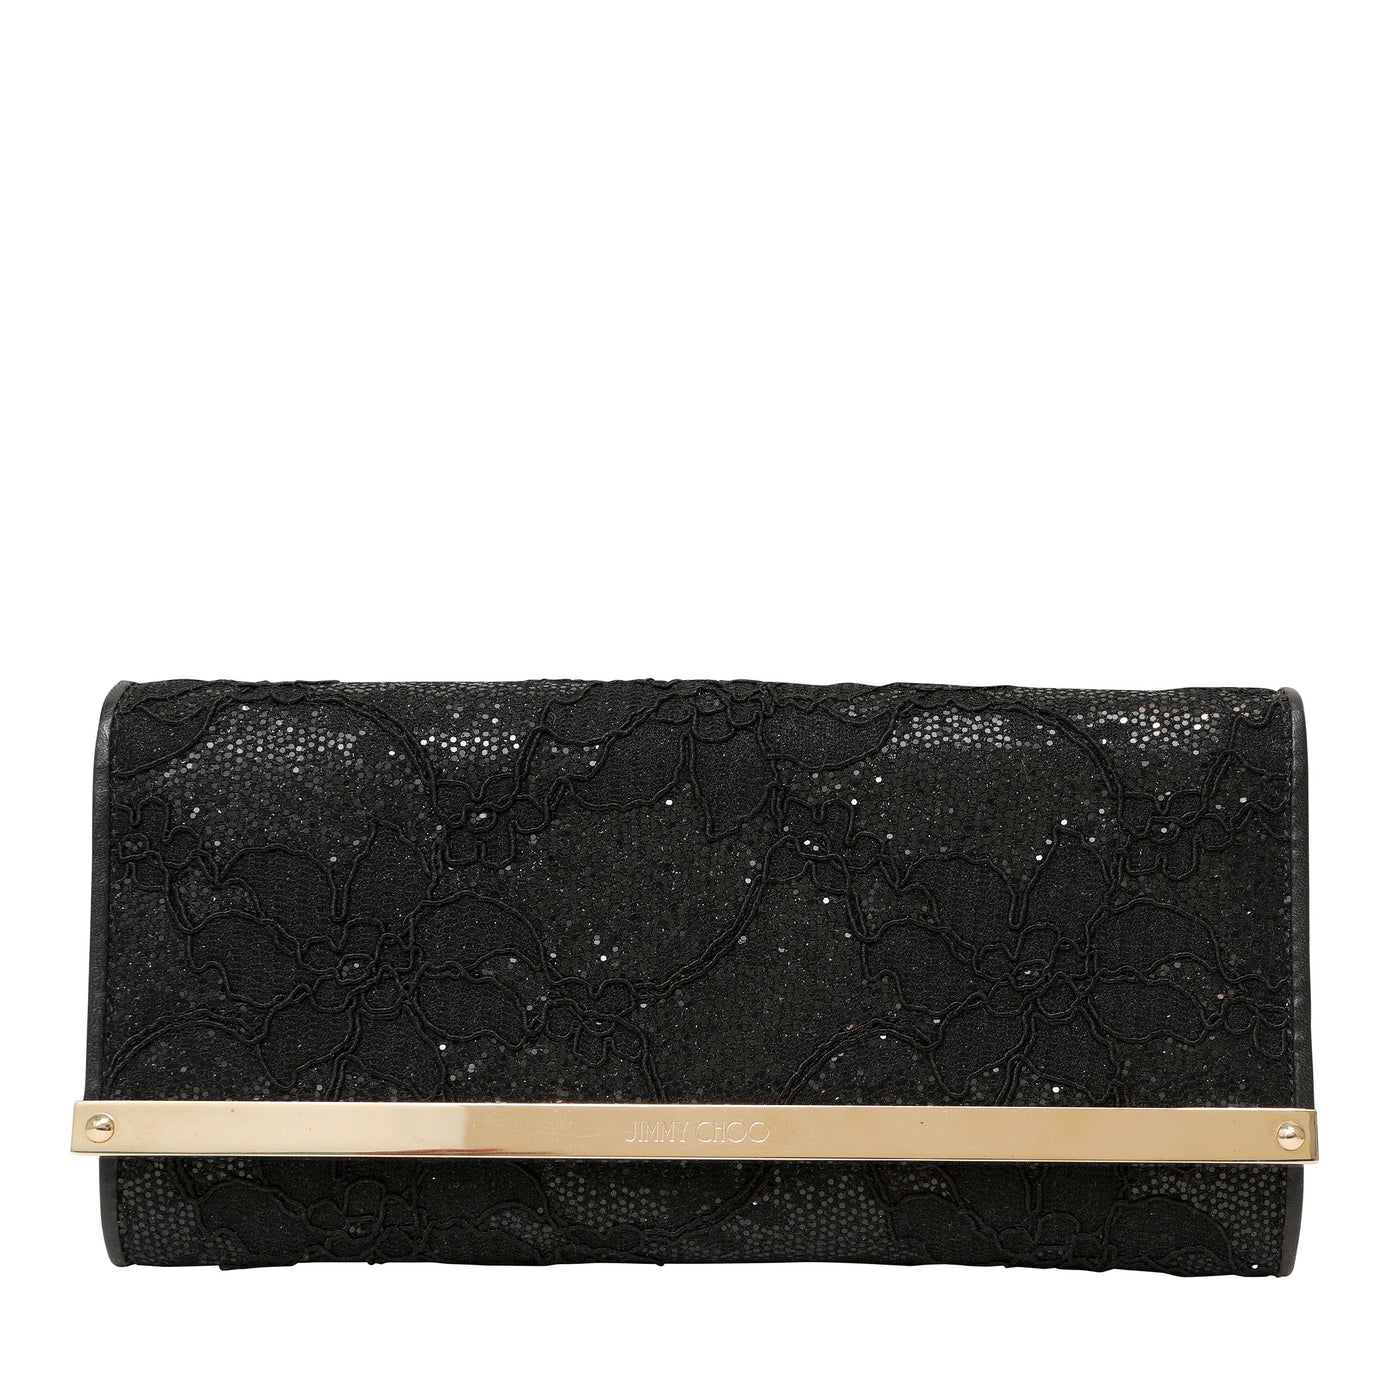 Jimmy Choo Black Lace Evening Crossbody with Silver Hardware